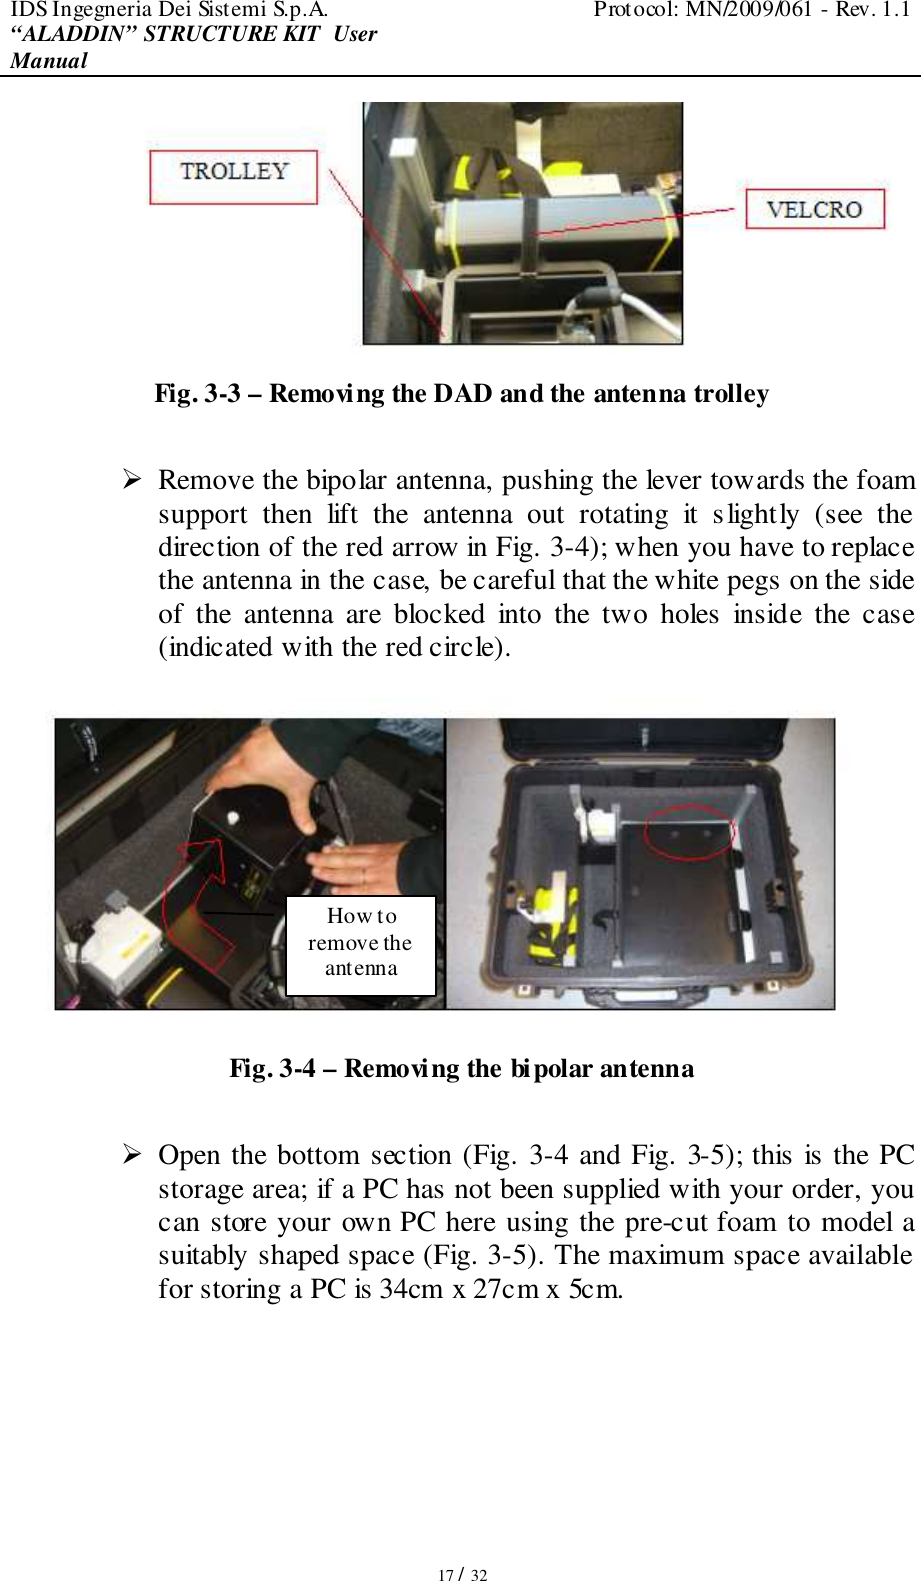 IDS Ingegneria Dei Sistemi S.p.A.  Protocol: MN/2009/061 - Rev. 1.1 “ALADDIN” STRUCTURE KIT  User Manual   17 / 32  Fig. 3-3 – Removing the DAD and the antenna trolley   Remove the bipolar antenna, pushing the lever towards the foam support  then  lift  the  antenna  out  rotating  it  slightly  (see  the direction of the red arrow in Fig. 3-4); when you have to replace the antenna in the case, be careful that the white pegs on the side of  the  antenna  are  blocked  into  the  two  holes  inside  the  case (indicated with the red circle).  Fig. 3-4 – Removing the bipolar antenna   Open the bottom section (Fig. 3-4 and Fig. 3-5); this is the PC storage area; if a PC has not been supplied with your order, you can store your own PC here using the pre-cut foam to model a suitably shaped space (Fig. 3-5). The maximum space available for storing a PC is 34cm x 27cm x 5cm.  How to remove the antenna 